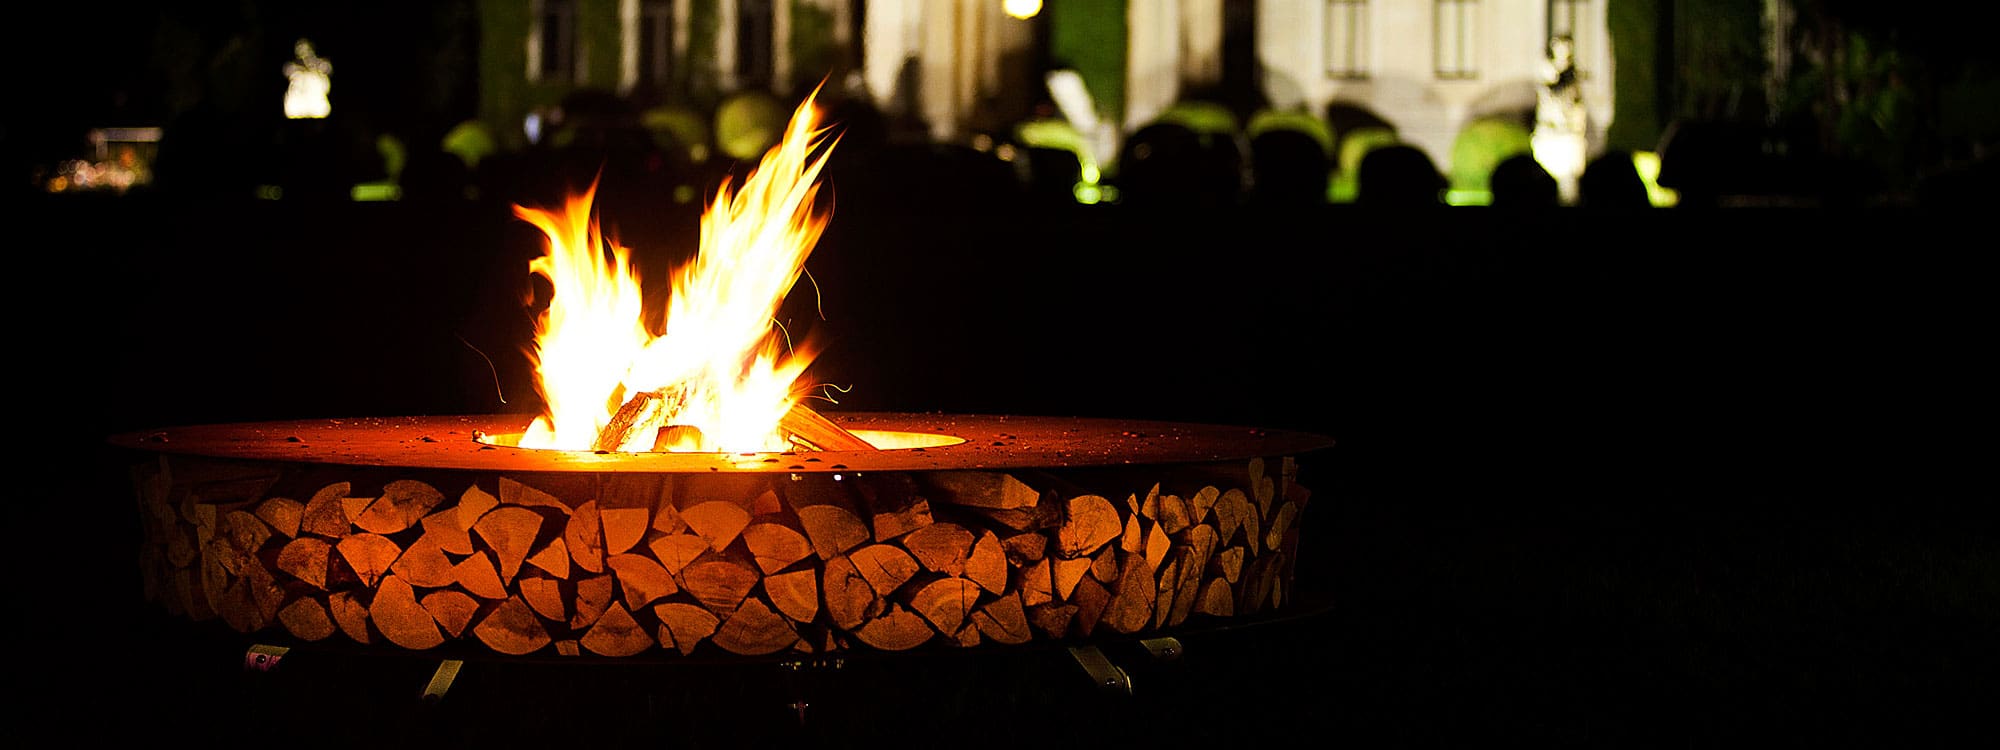 Image of AK47 Zero round fire pit in corten steel with flames blazing from combustion chamber